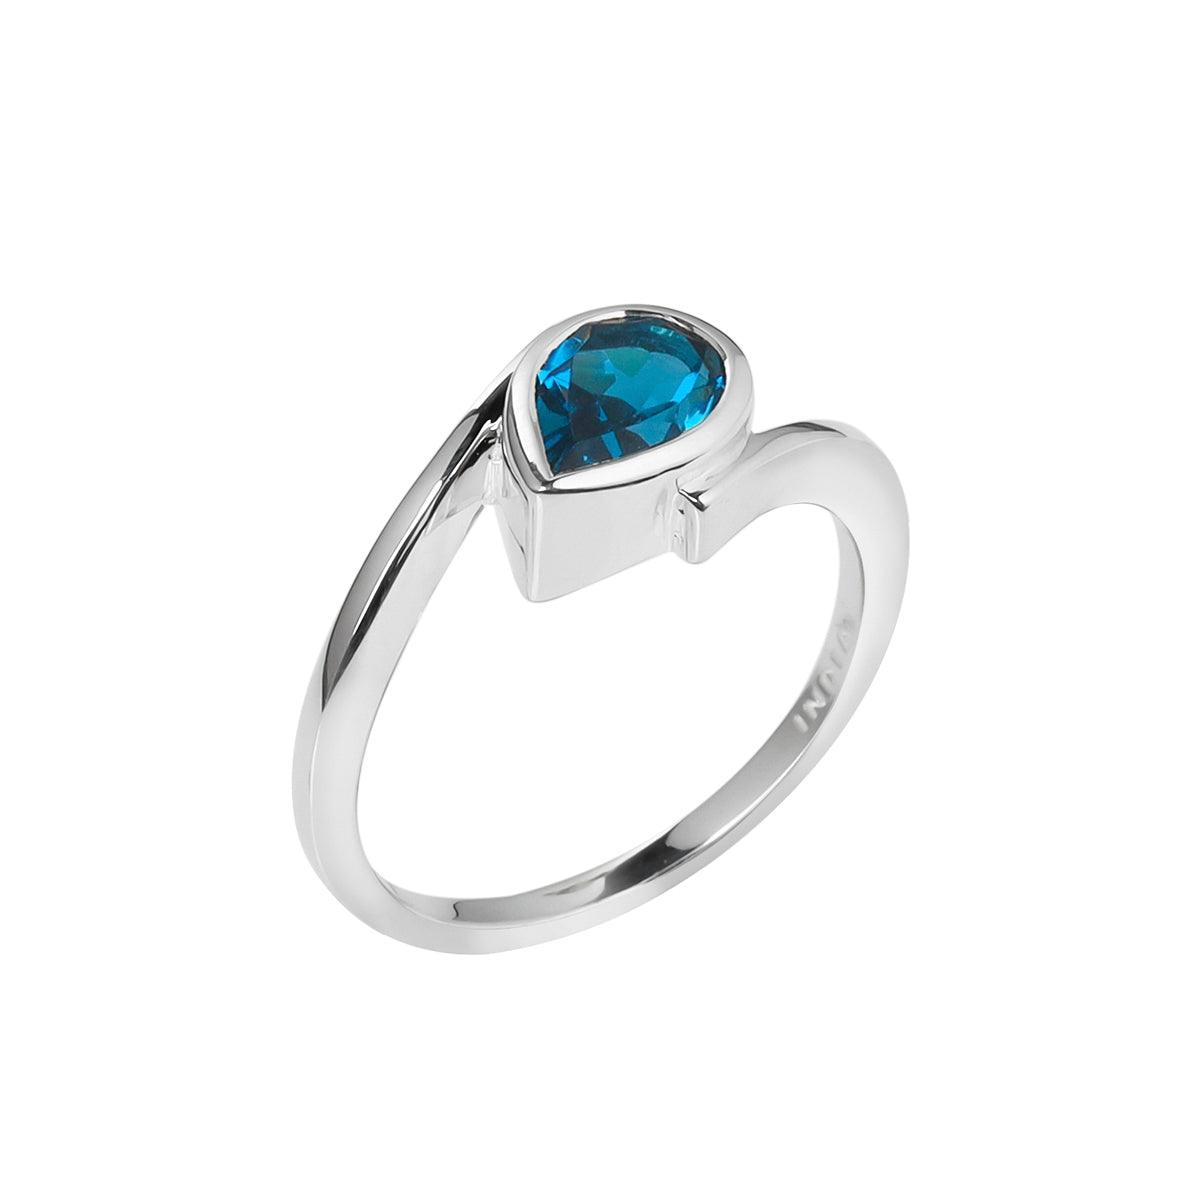 London Blue Topaz Solitaire Ring in Solid 925 Sterling Silver Jewelry - YoTreasure